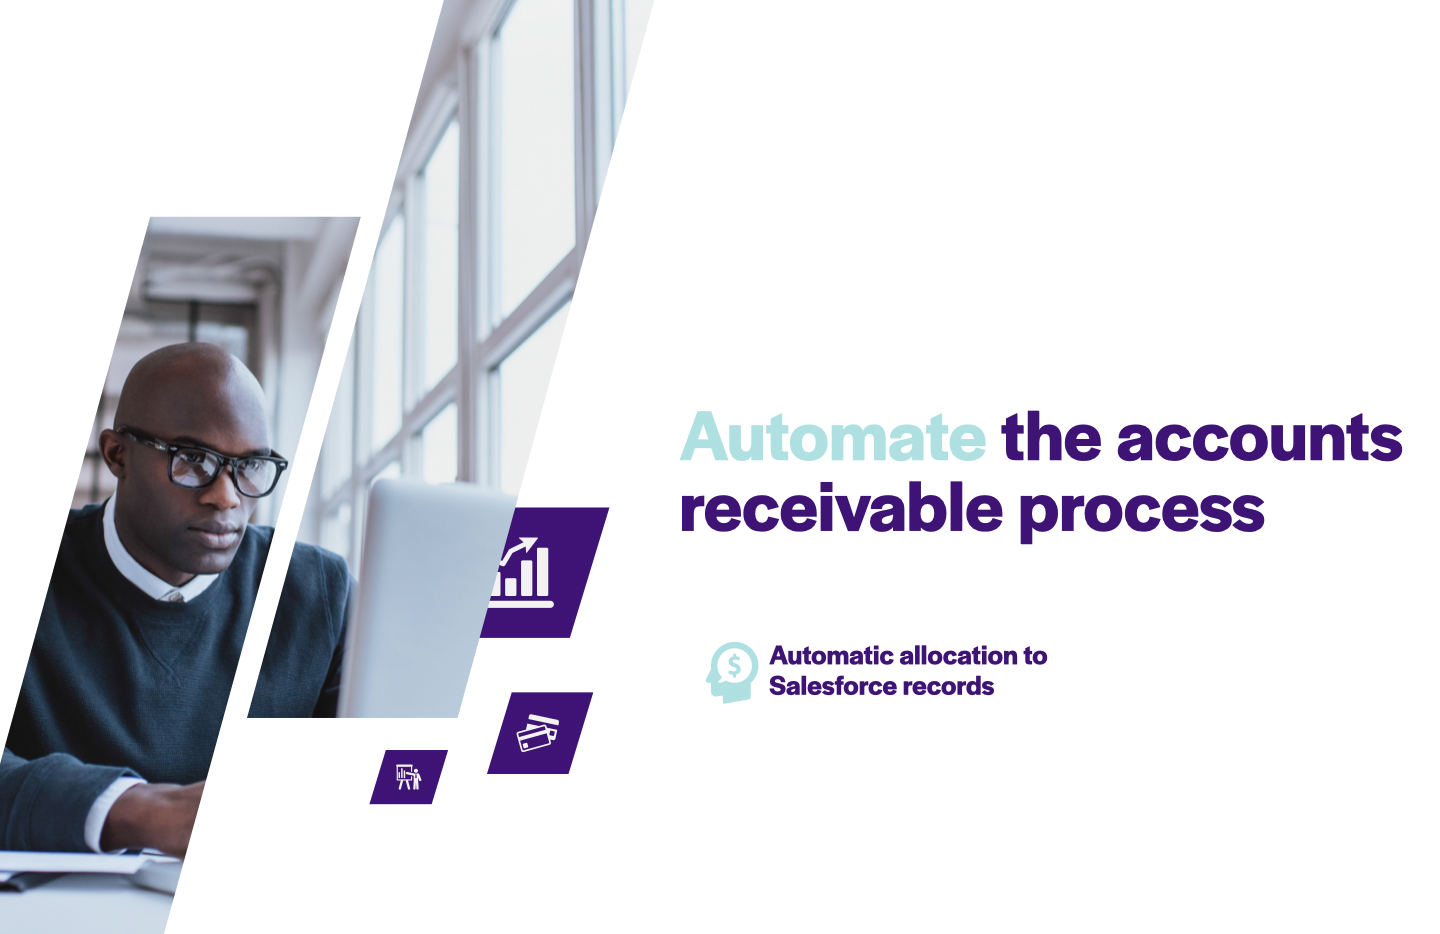 Completely automated A/R: Automate your check-scanning for a fully automated accounts receivable process.